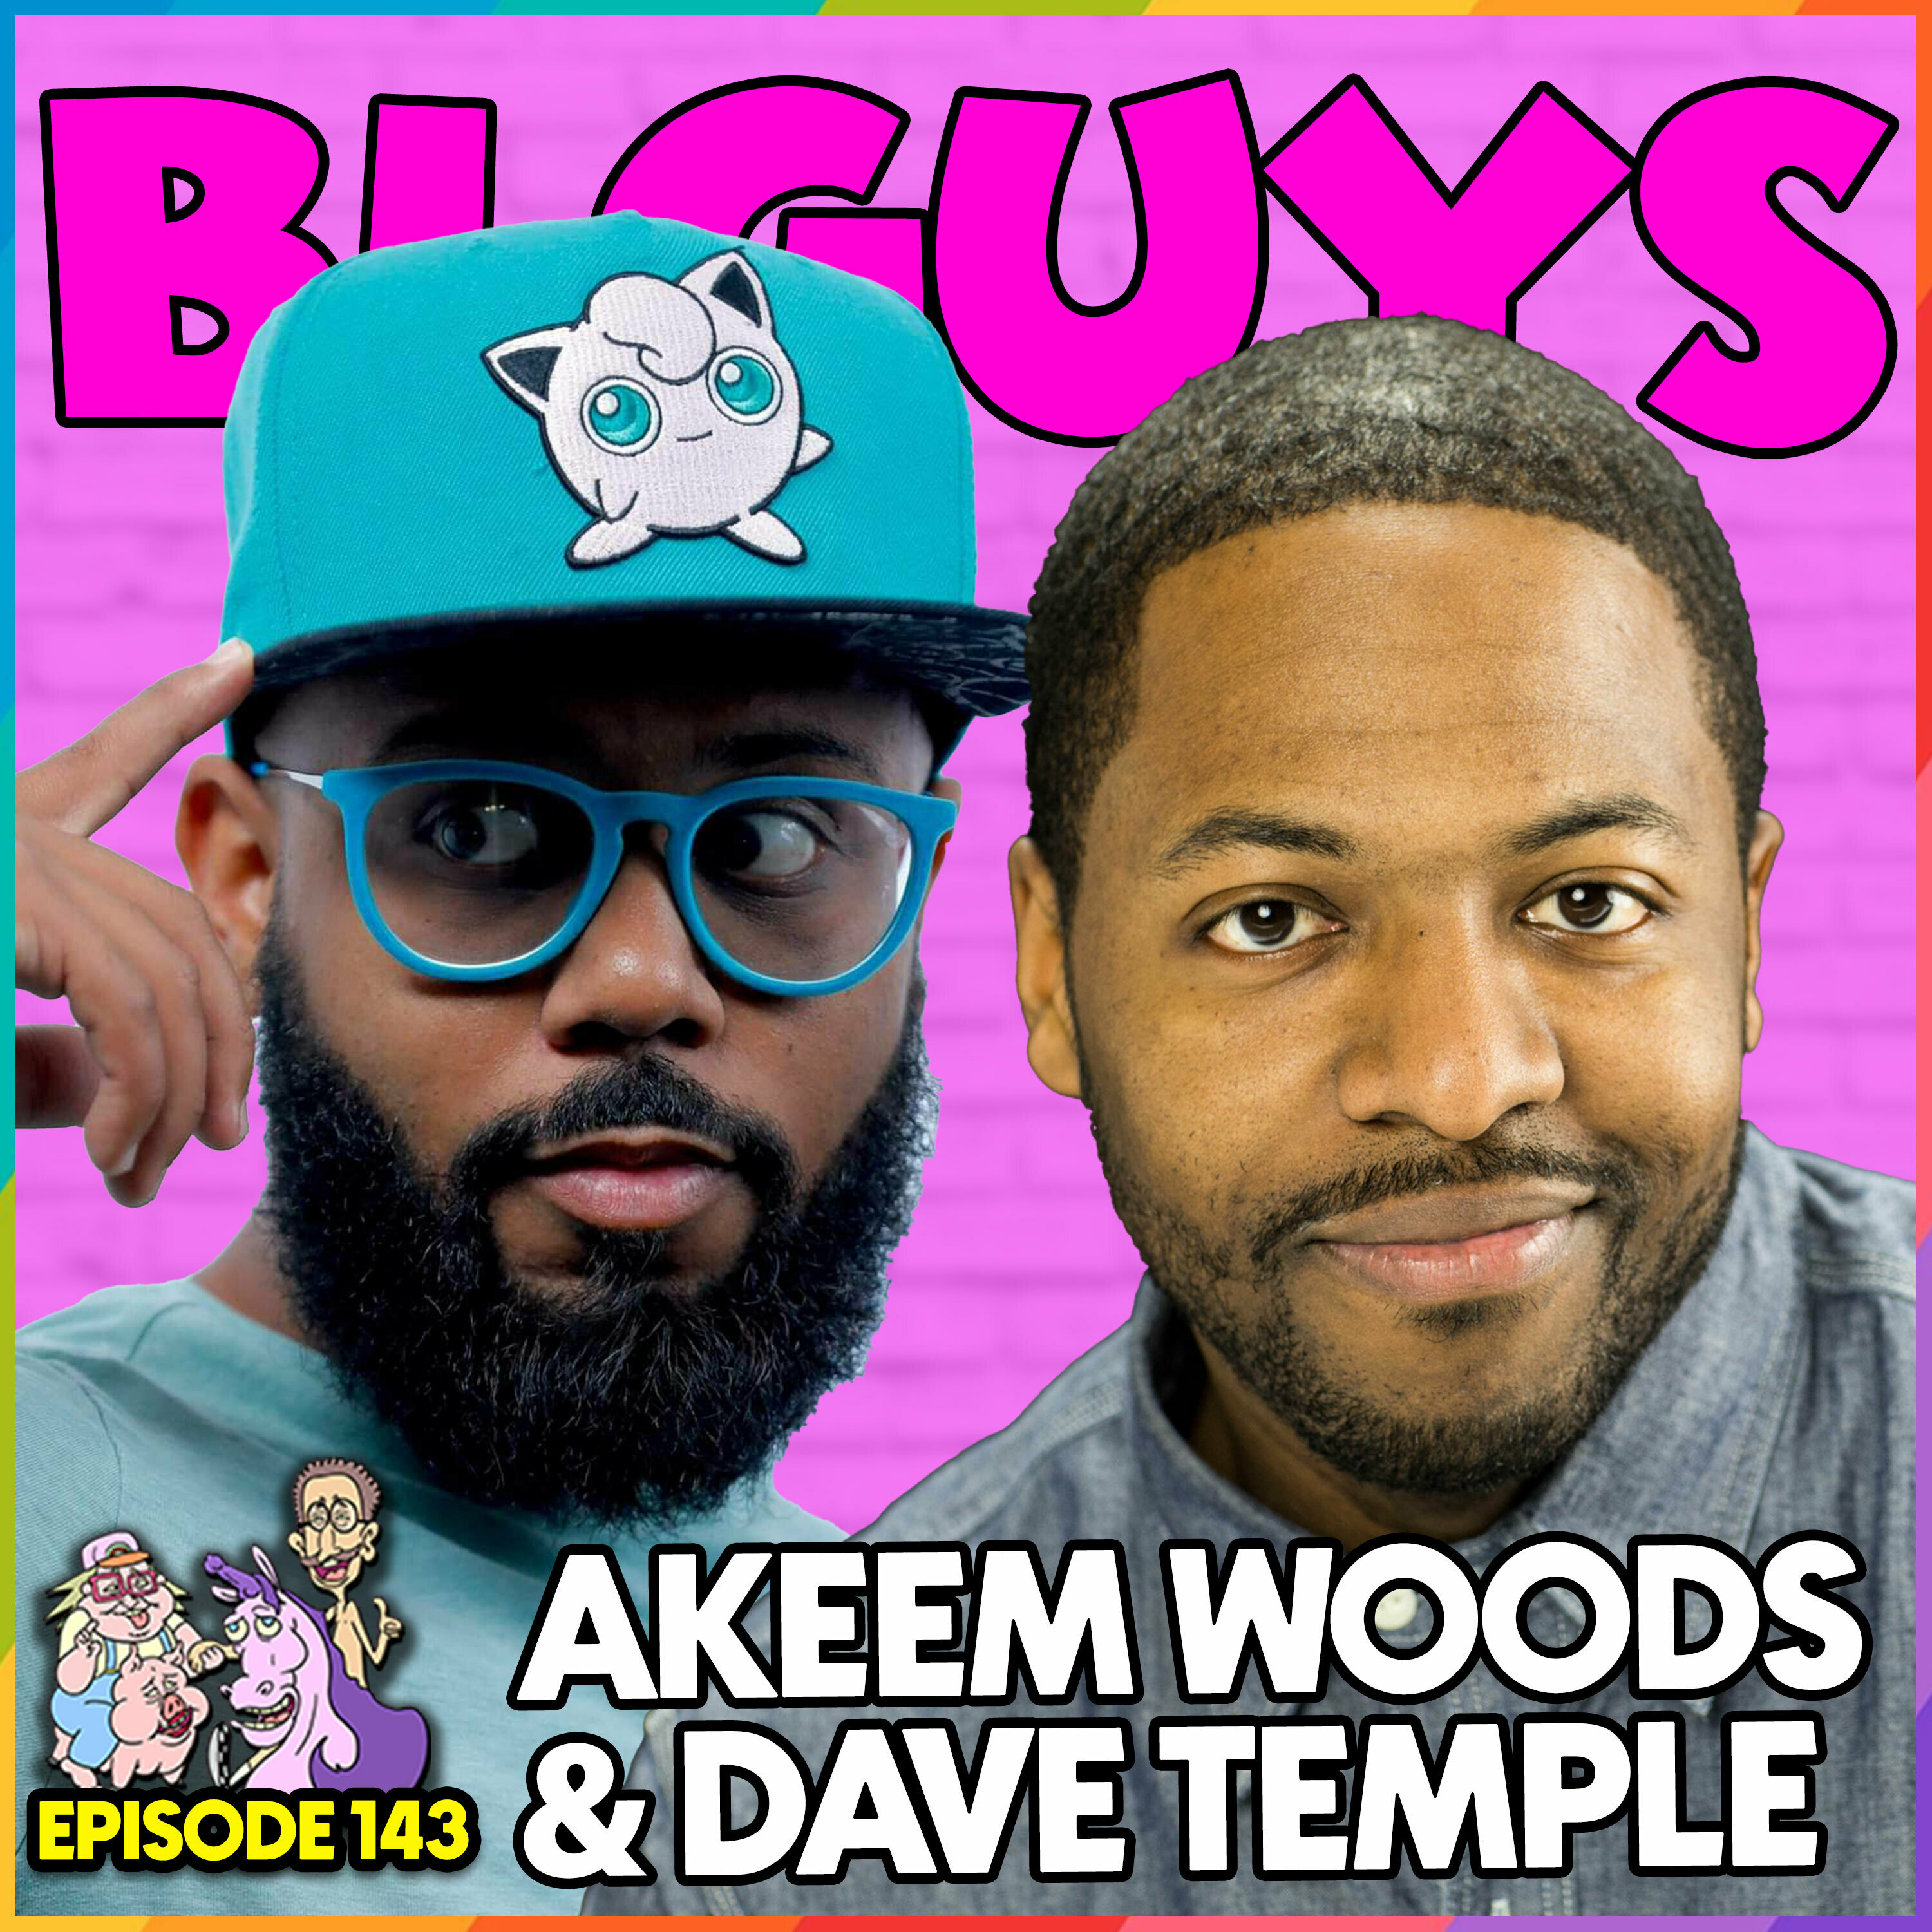 Episode 143 - Window Shopping for Hookers - Dave Temple and Akeem Woods